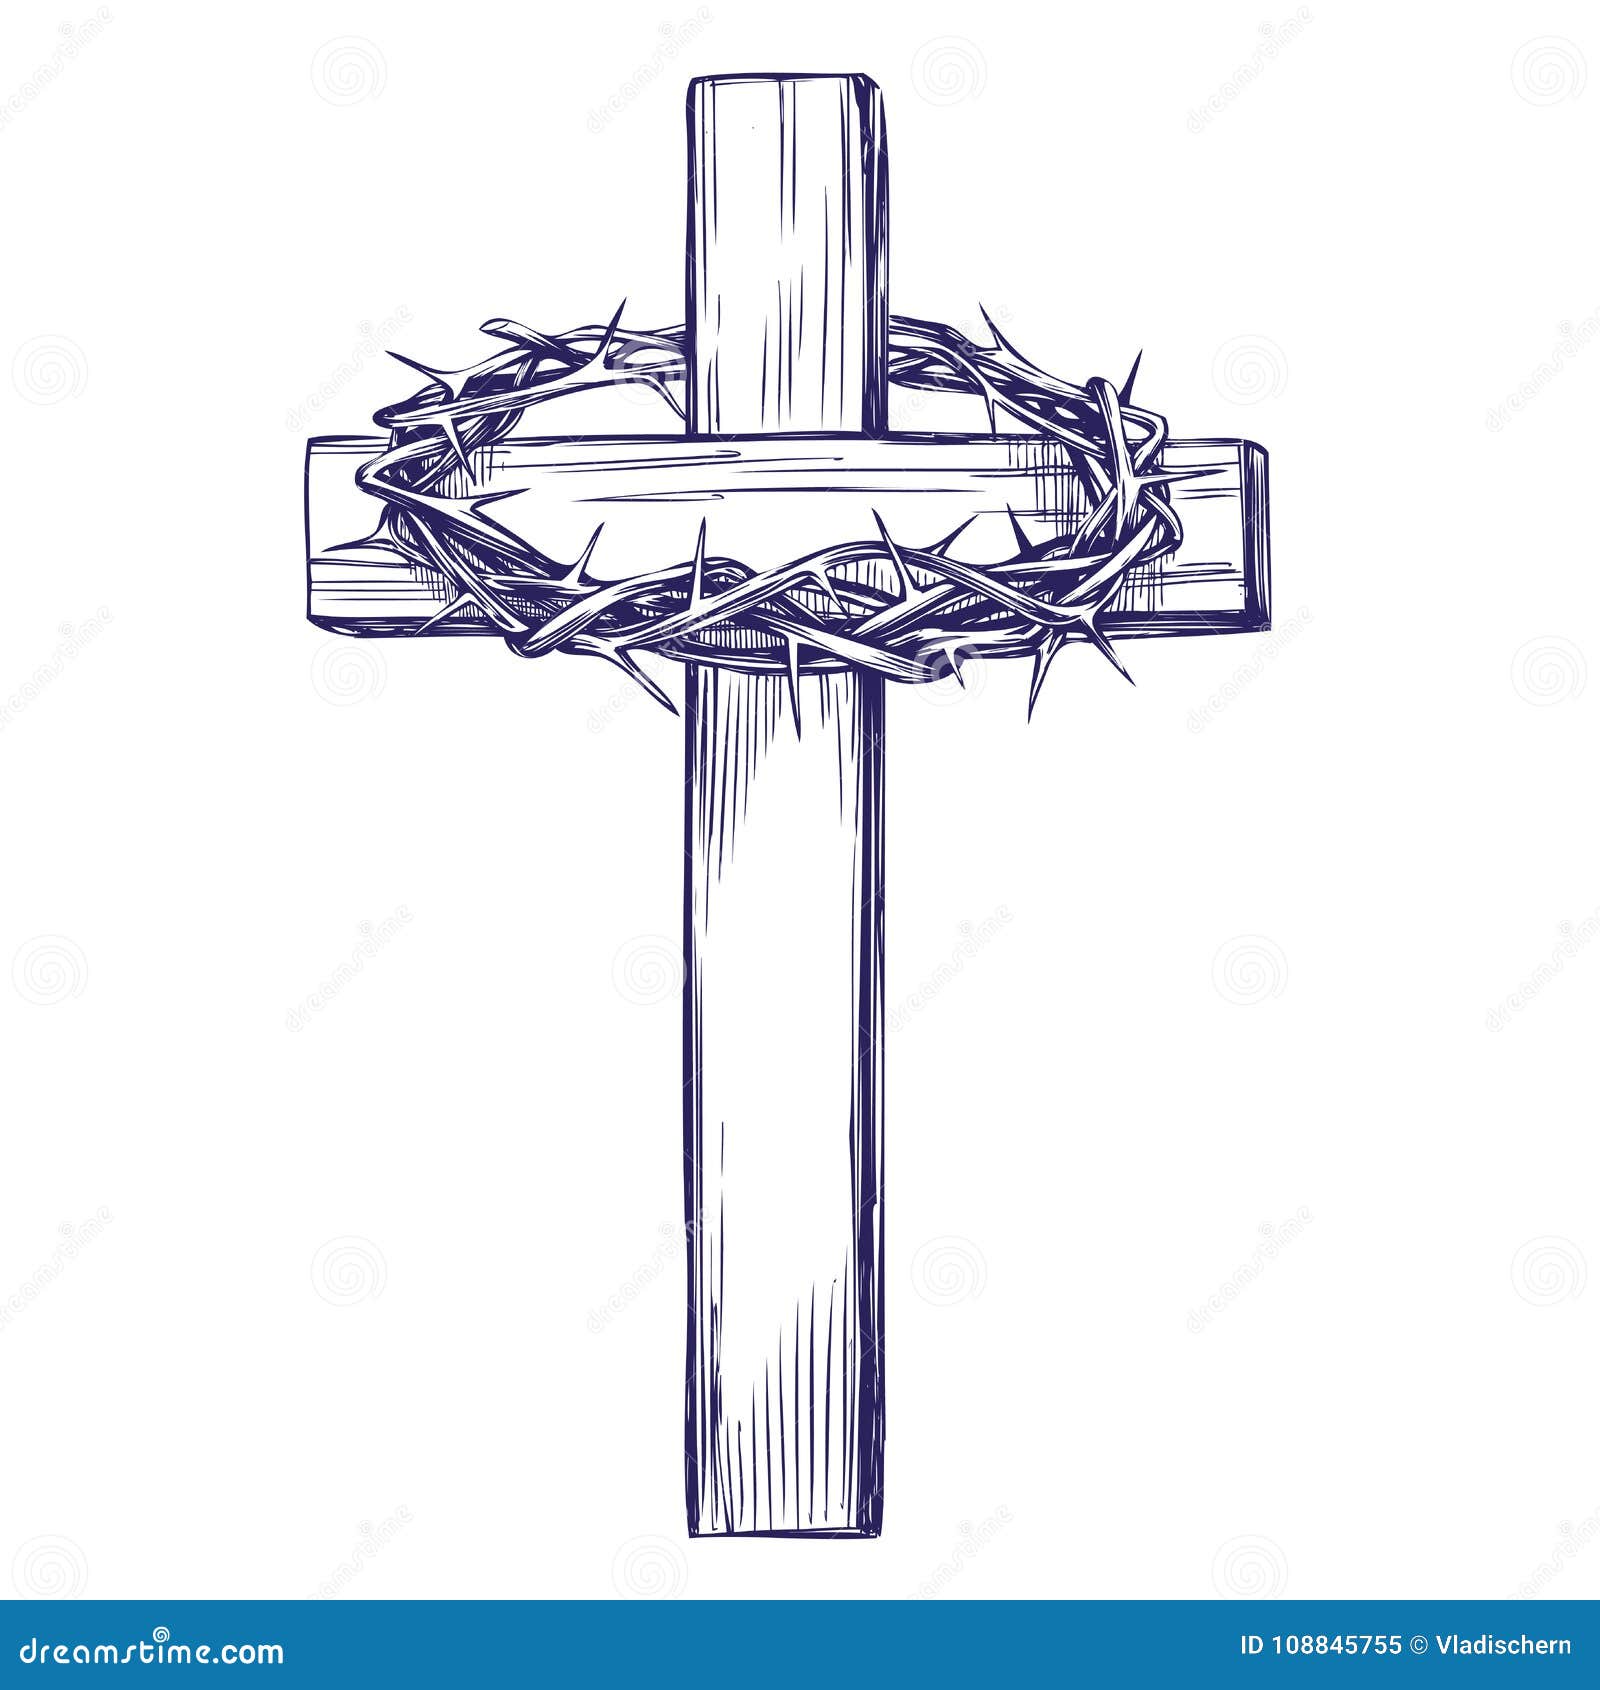 Top more than 75 cool cross sketches best - in.eteachers